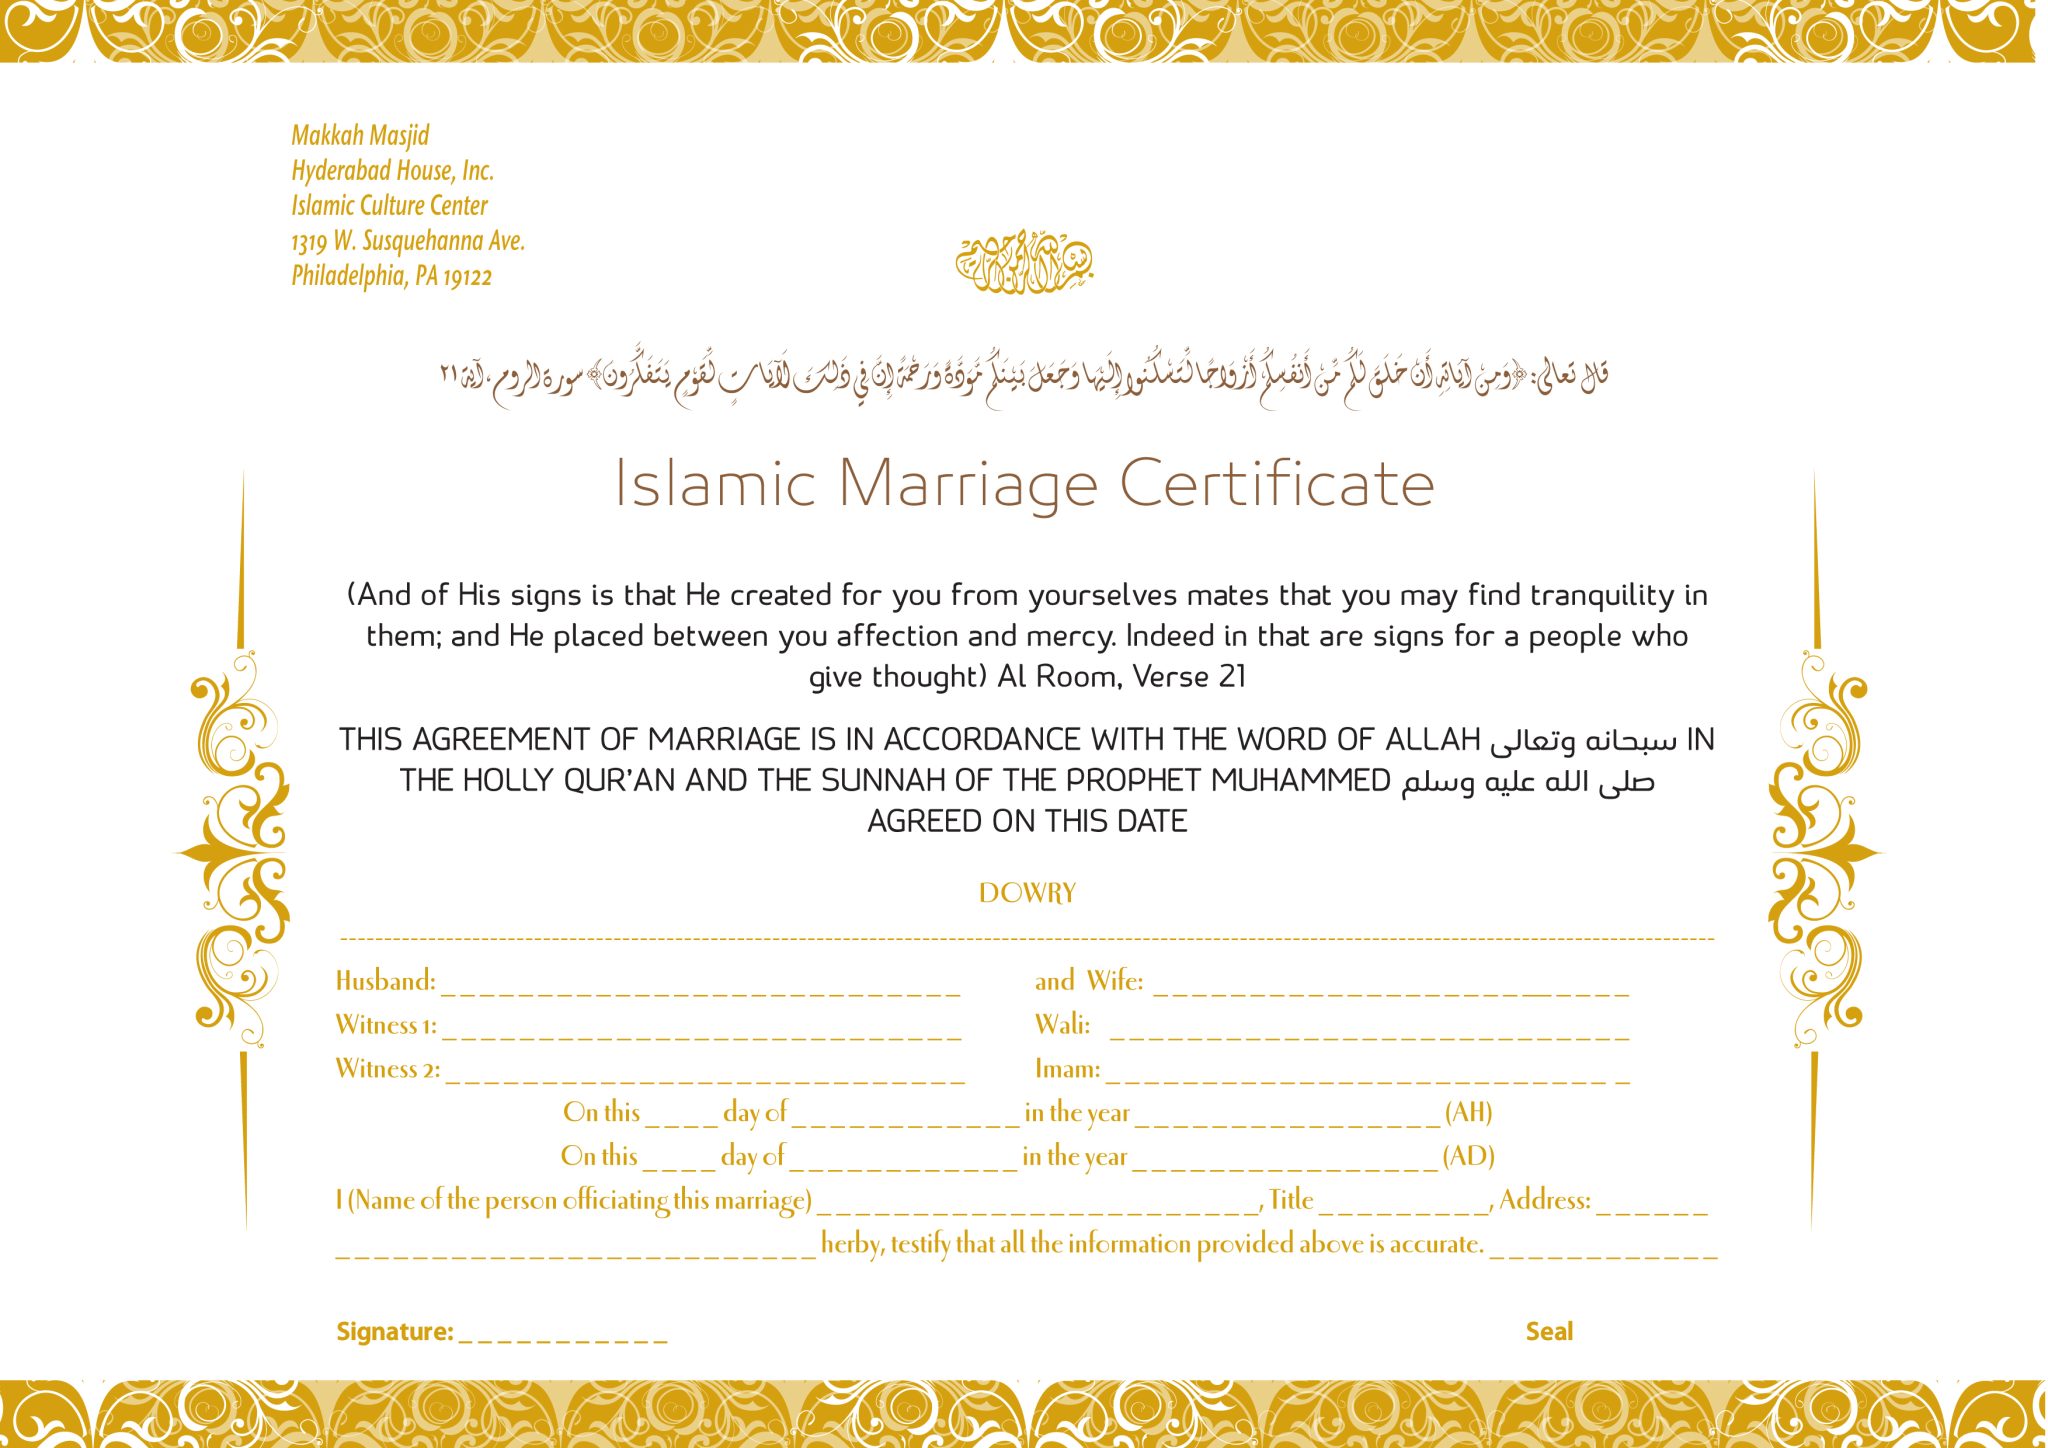 islamic marriage certificate template word, muslim marriage certificate template free, muslim marriage certificate uk, nikah islamic marriage certificate template, blank islamic marriage certificate, islamic marriage certificate design, religious marriage certificate template, islamic wedding certificate template